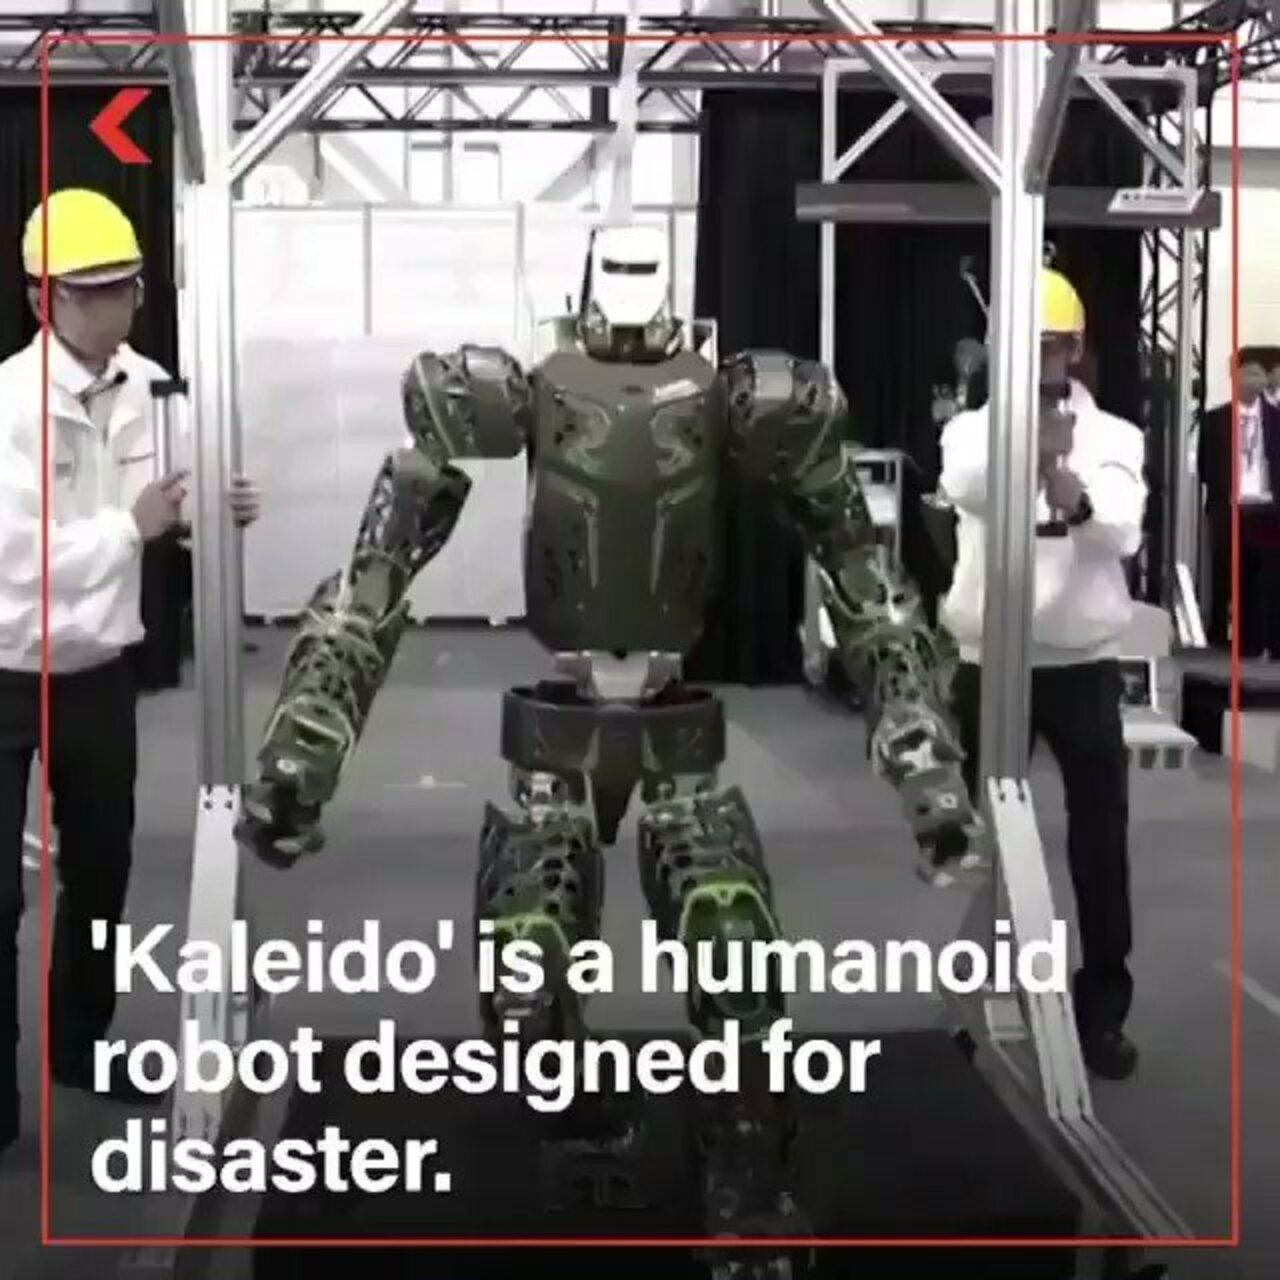 To assist in disaster relief efforts, this #robot can lift humans and objects using its powerful arms By @Reuters #AI #Robots #IoT #Robotics #Tech #ArtificialInteligence #innovation #MachineLearning #5G  Cc: @mvollmer1 @Julez_Norton @NortonRobotics @labordeolivier @ShiCooks https://t.co/9B9hM0o2Nt